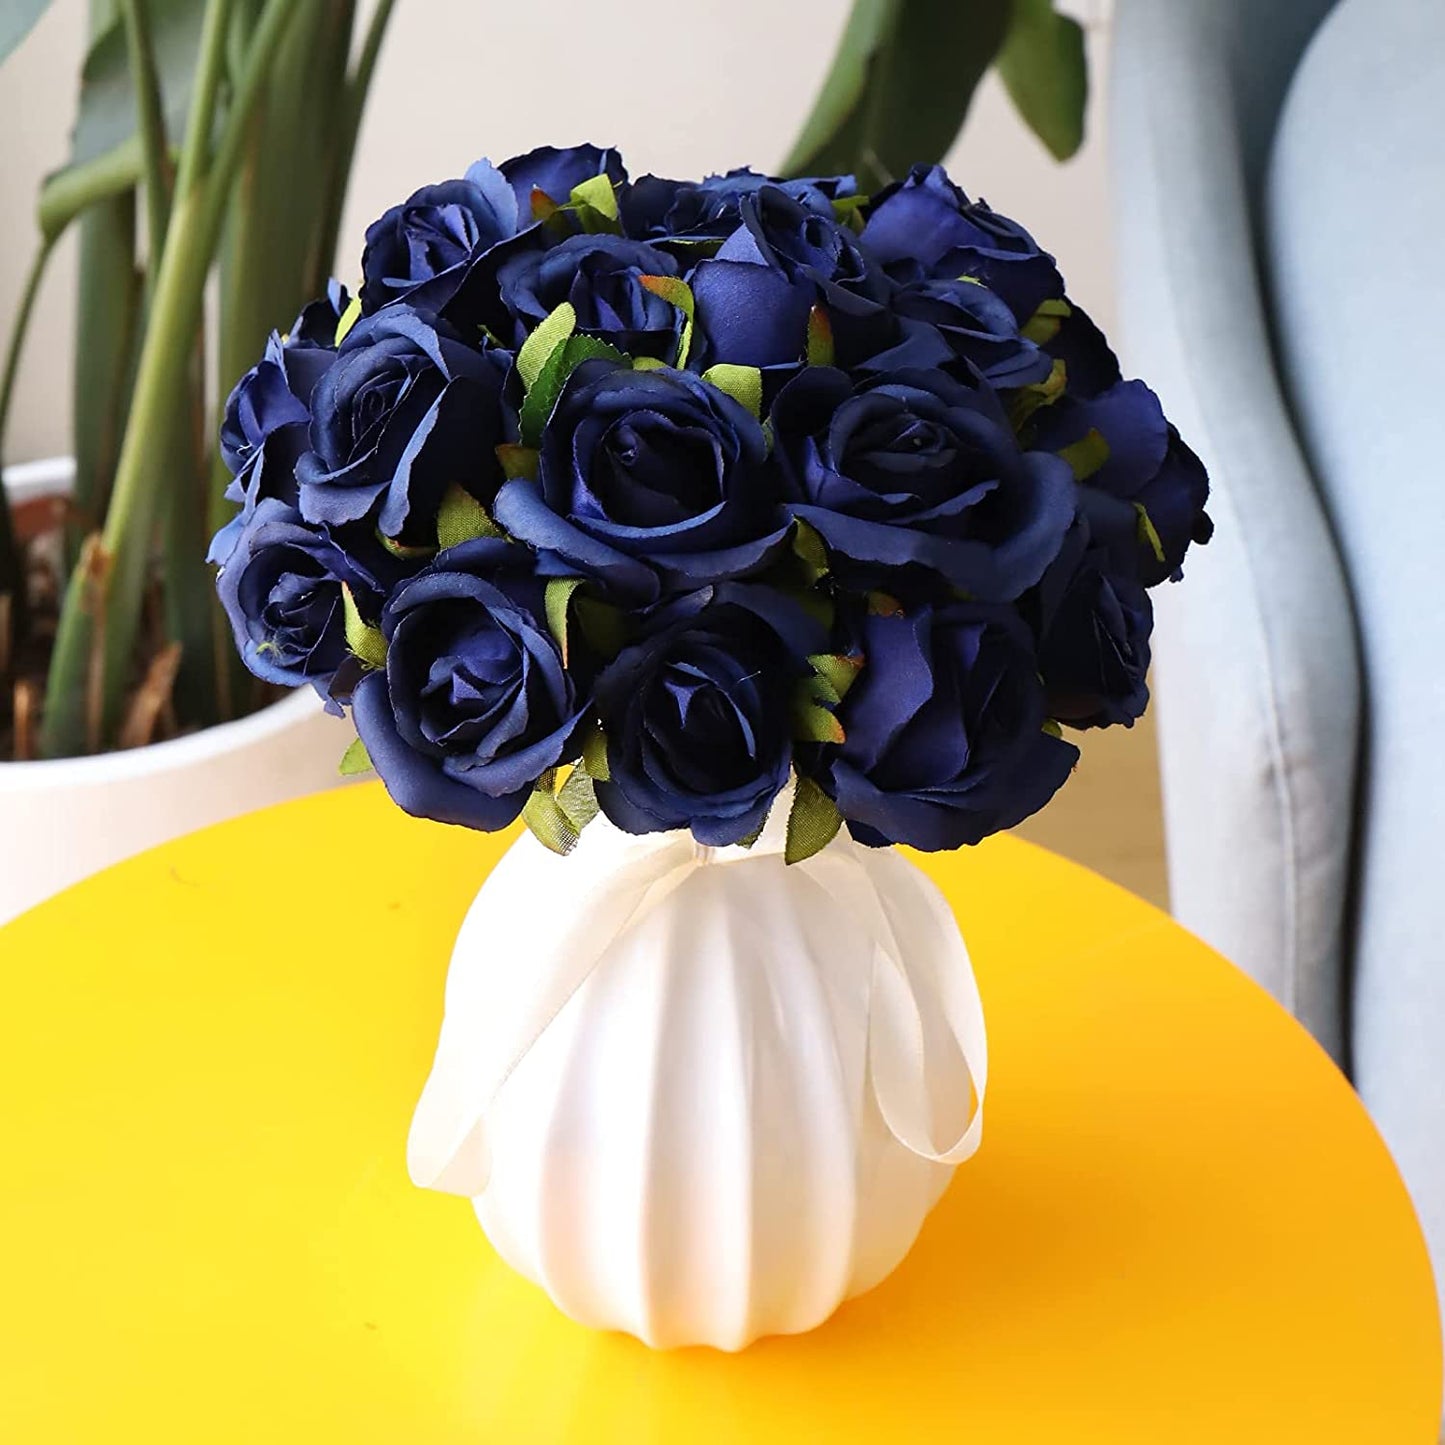 24 PCS Artificial Flowers, Real Touch Fake Flowers for Decoration, Artificial Rose with Stems for Room Decor and Home Wedding Party Baby Shower Centerpieces Decorations (Navy Blue)